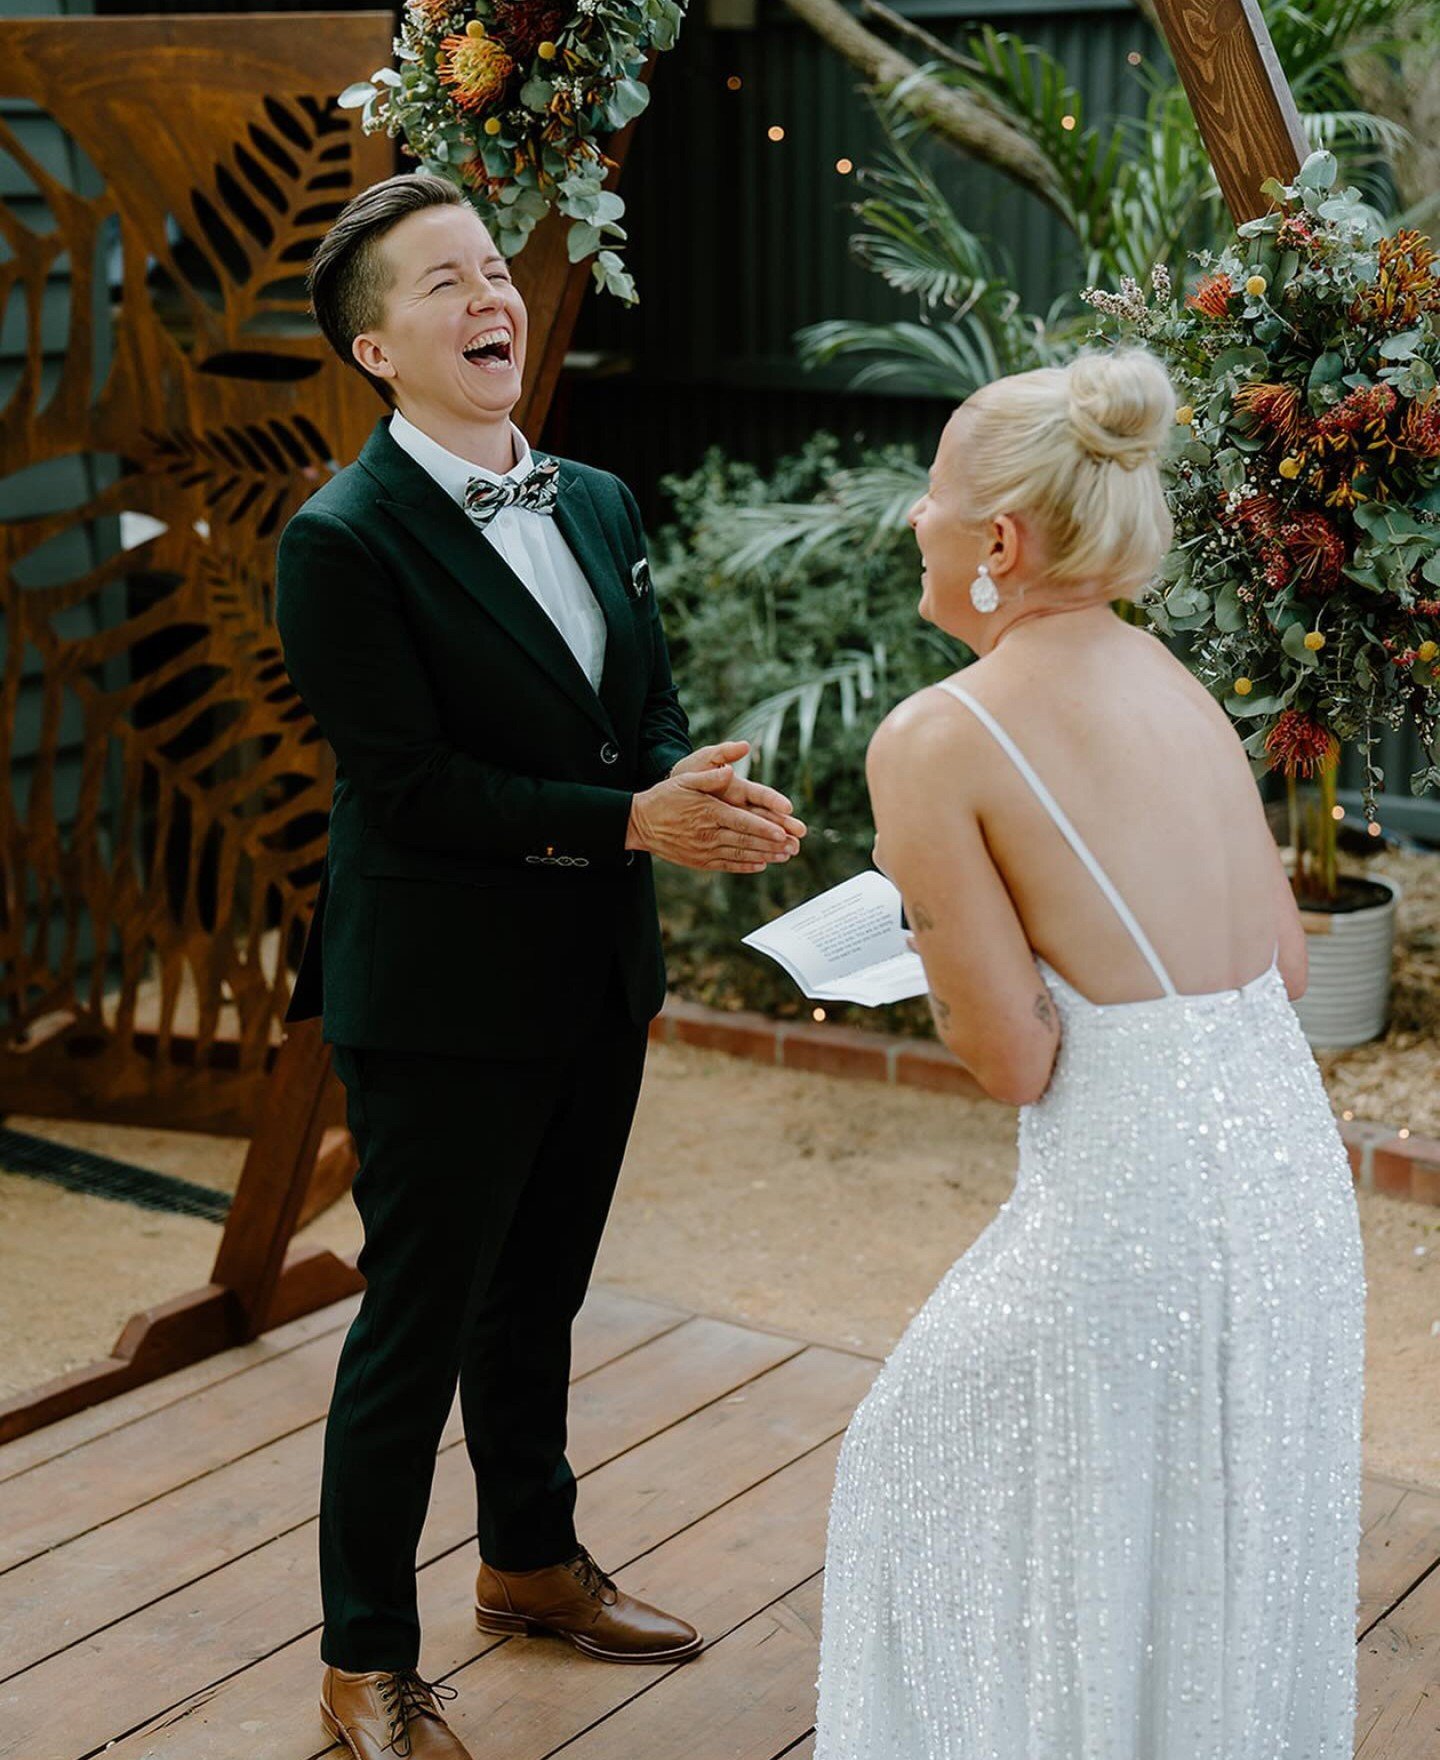 Throwing it back to this special day for these newly weds! 💖✨We had a blast making Katri's suit for their special day. @yourmatewhatsherface

Shoutout to @emilyhowlettphotography for this beautiful image 📸 💐✨